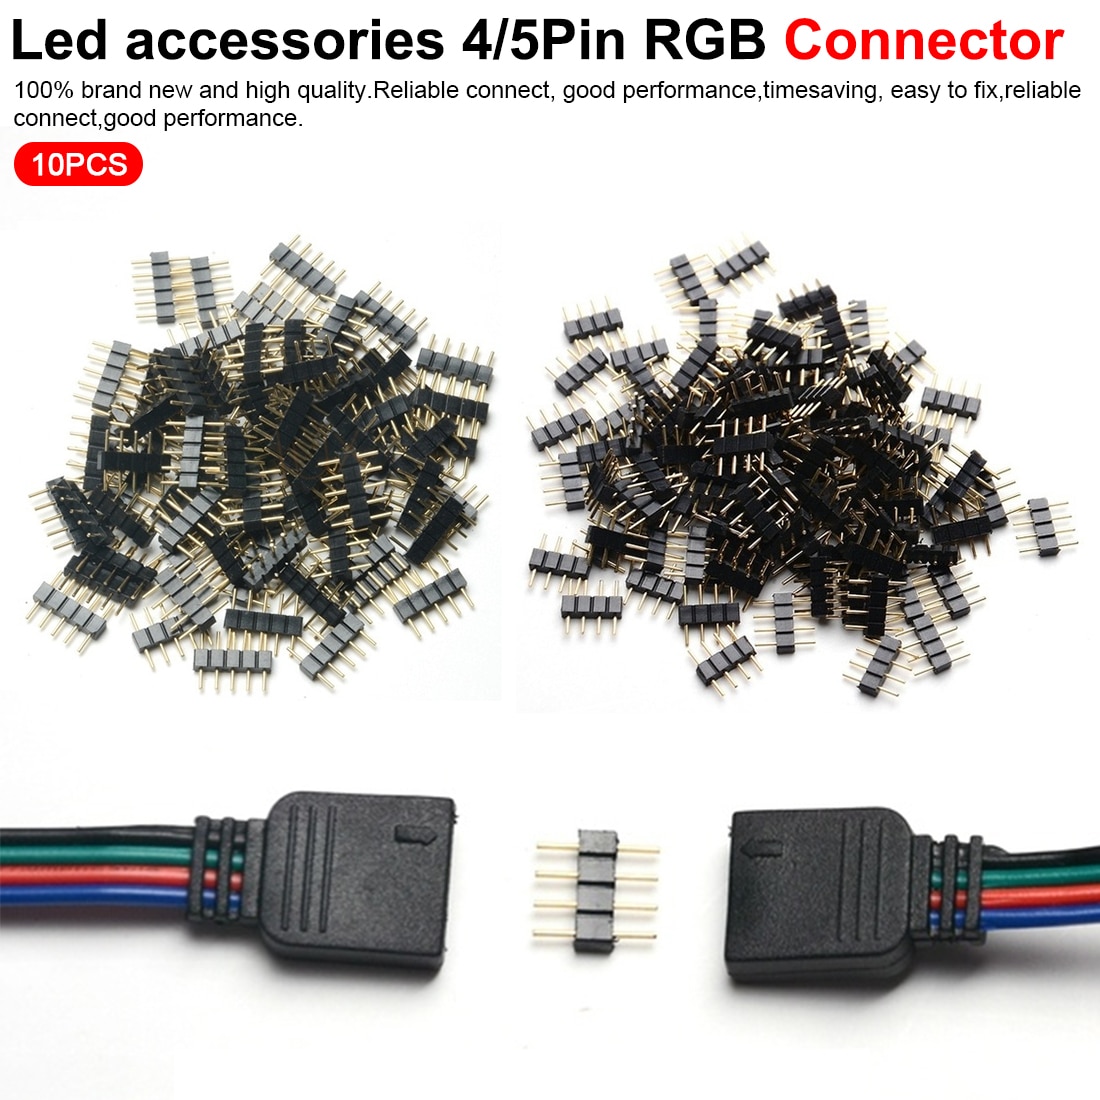 Mooie Led Accessoires 4 Pin/5Pin Rgb Connector Adapter Pin Naald Mannelijke Type Voor Rgb/Rgbw 5050 3528 led Strip Licht